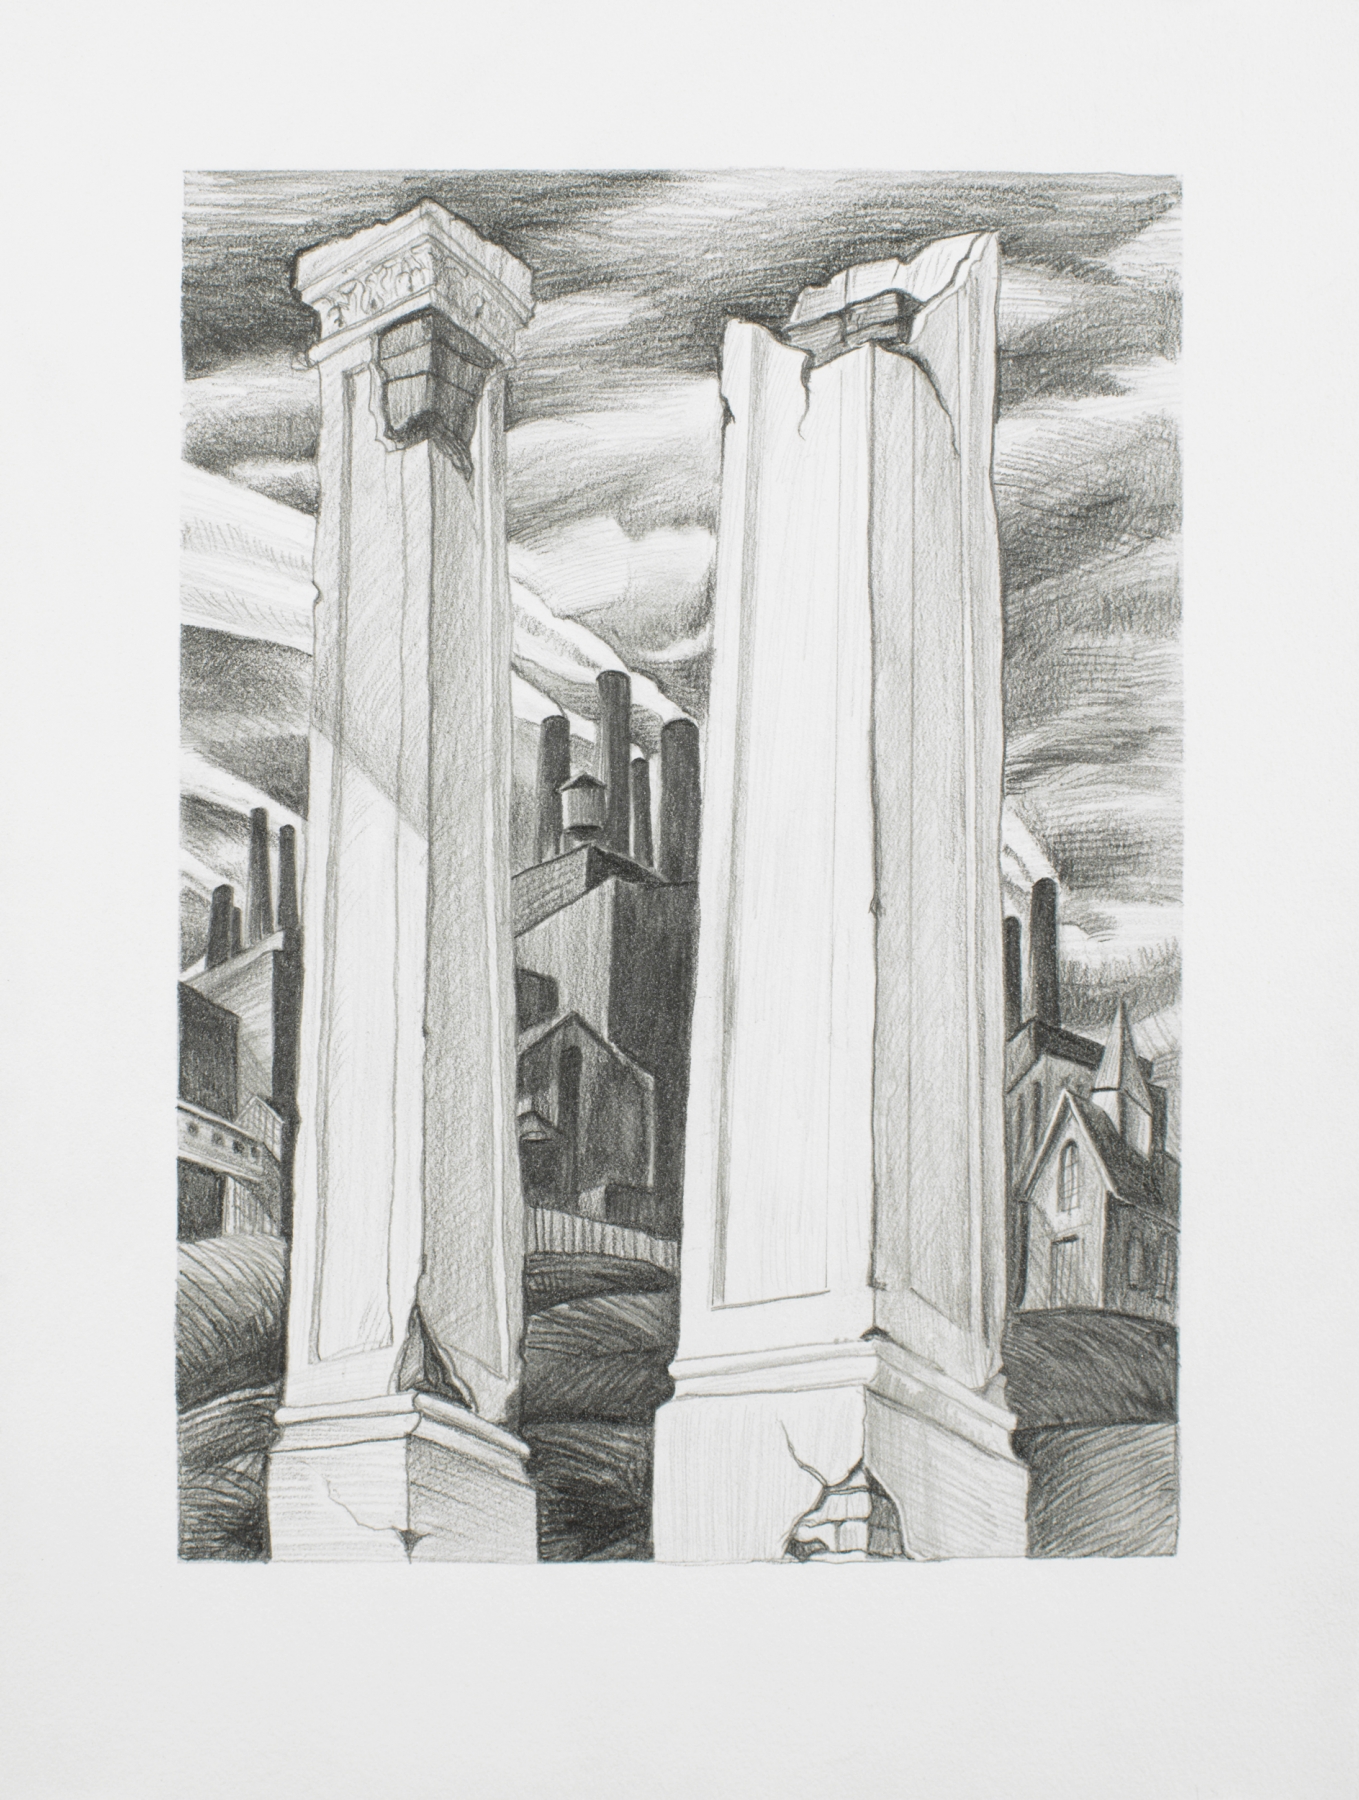 Ken Gonzales-Day
Untitled (After Harry Stenberg, Southern Holiday, 1935), 2021
Archival ink and pencil on Arches BFK Rives
15 x 11 in.